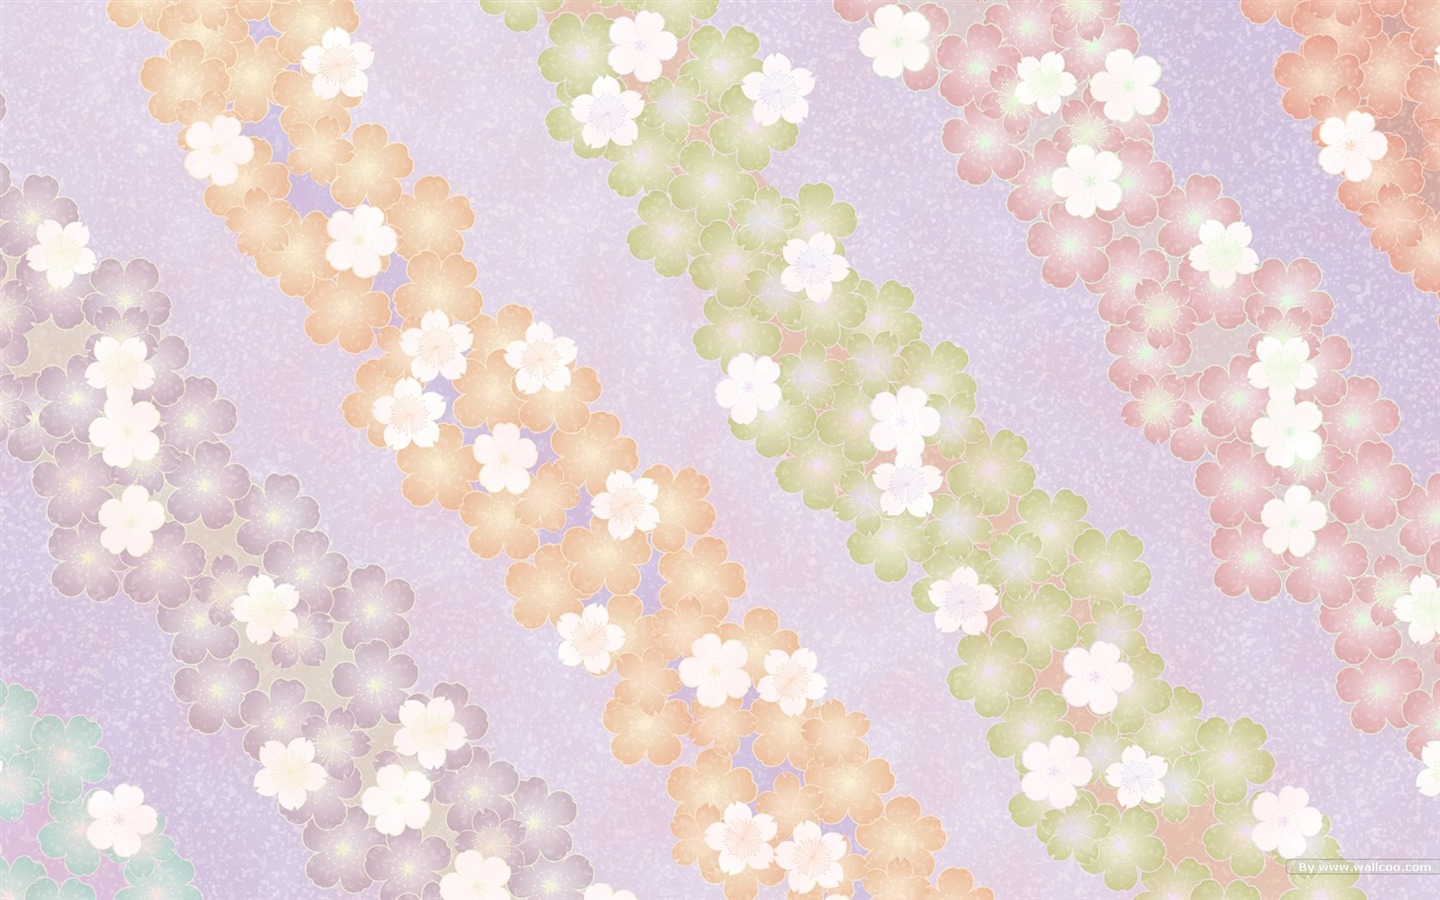 Japan style wallpaper pattern and color #10 - 1440x900